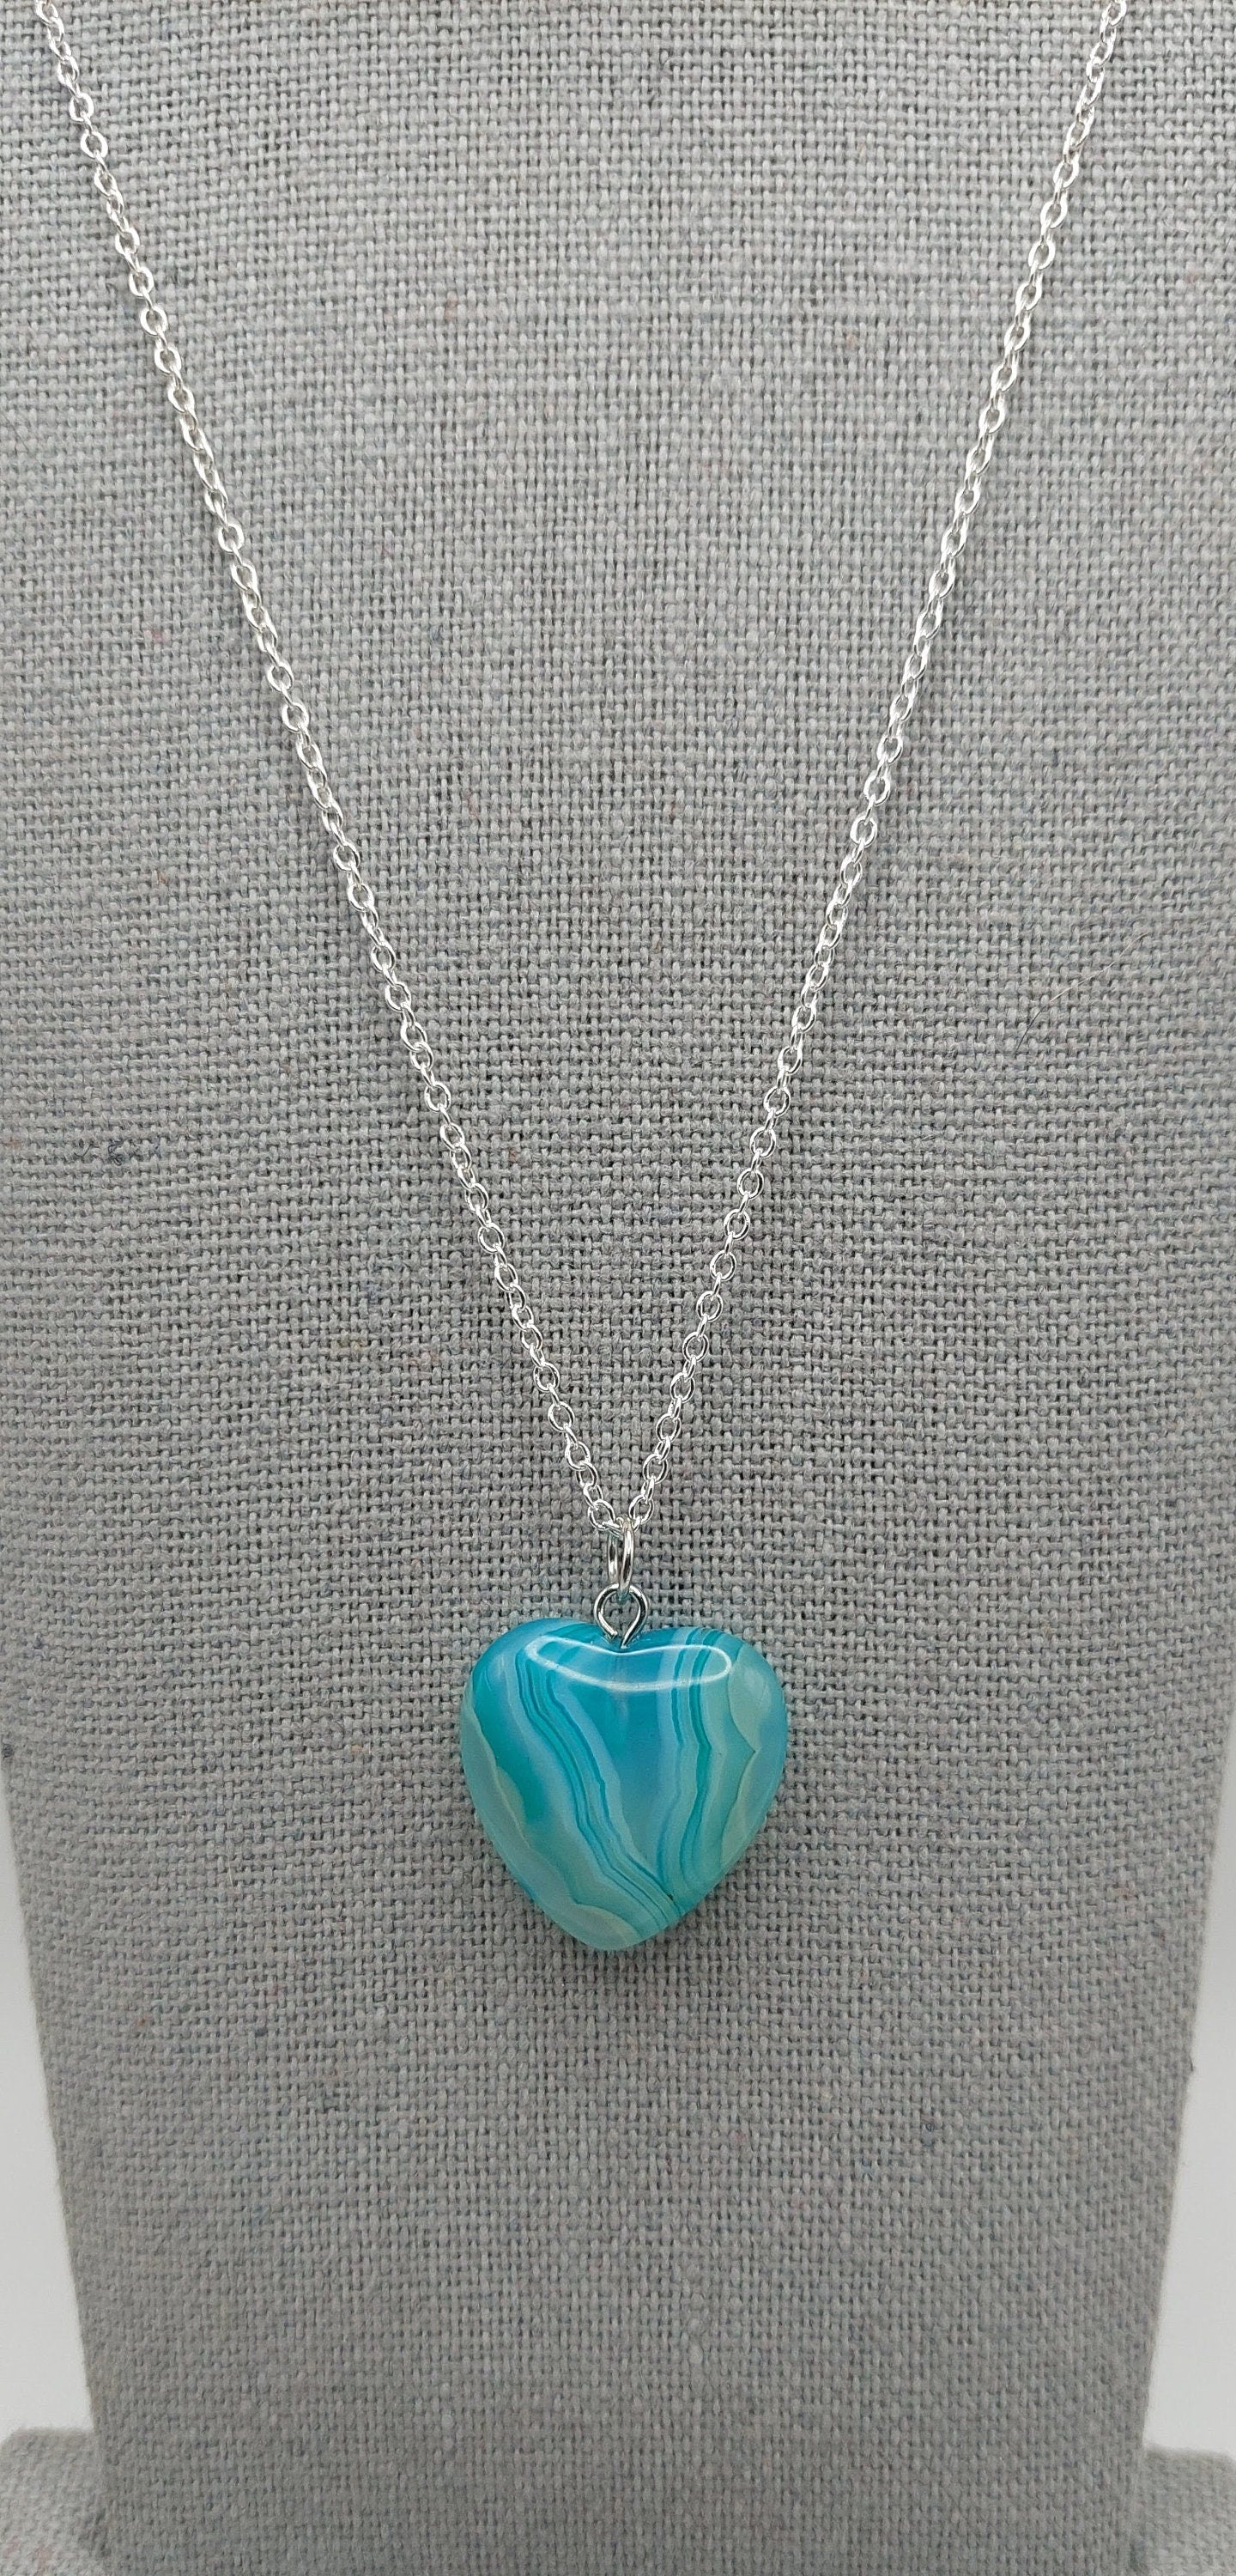 Blue and White Onyx Agate Heart Pendant Necklace